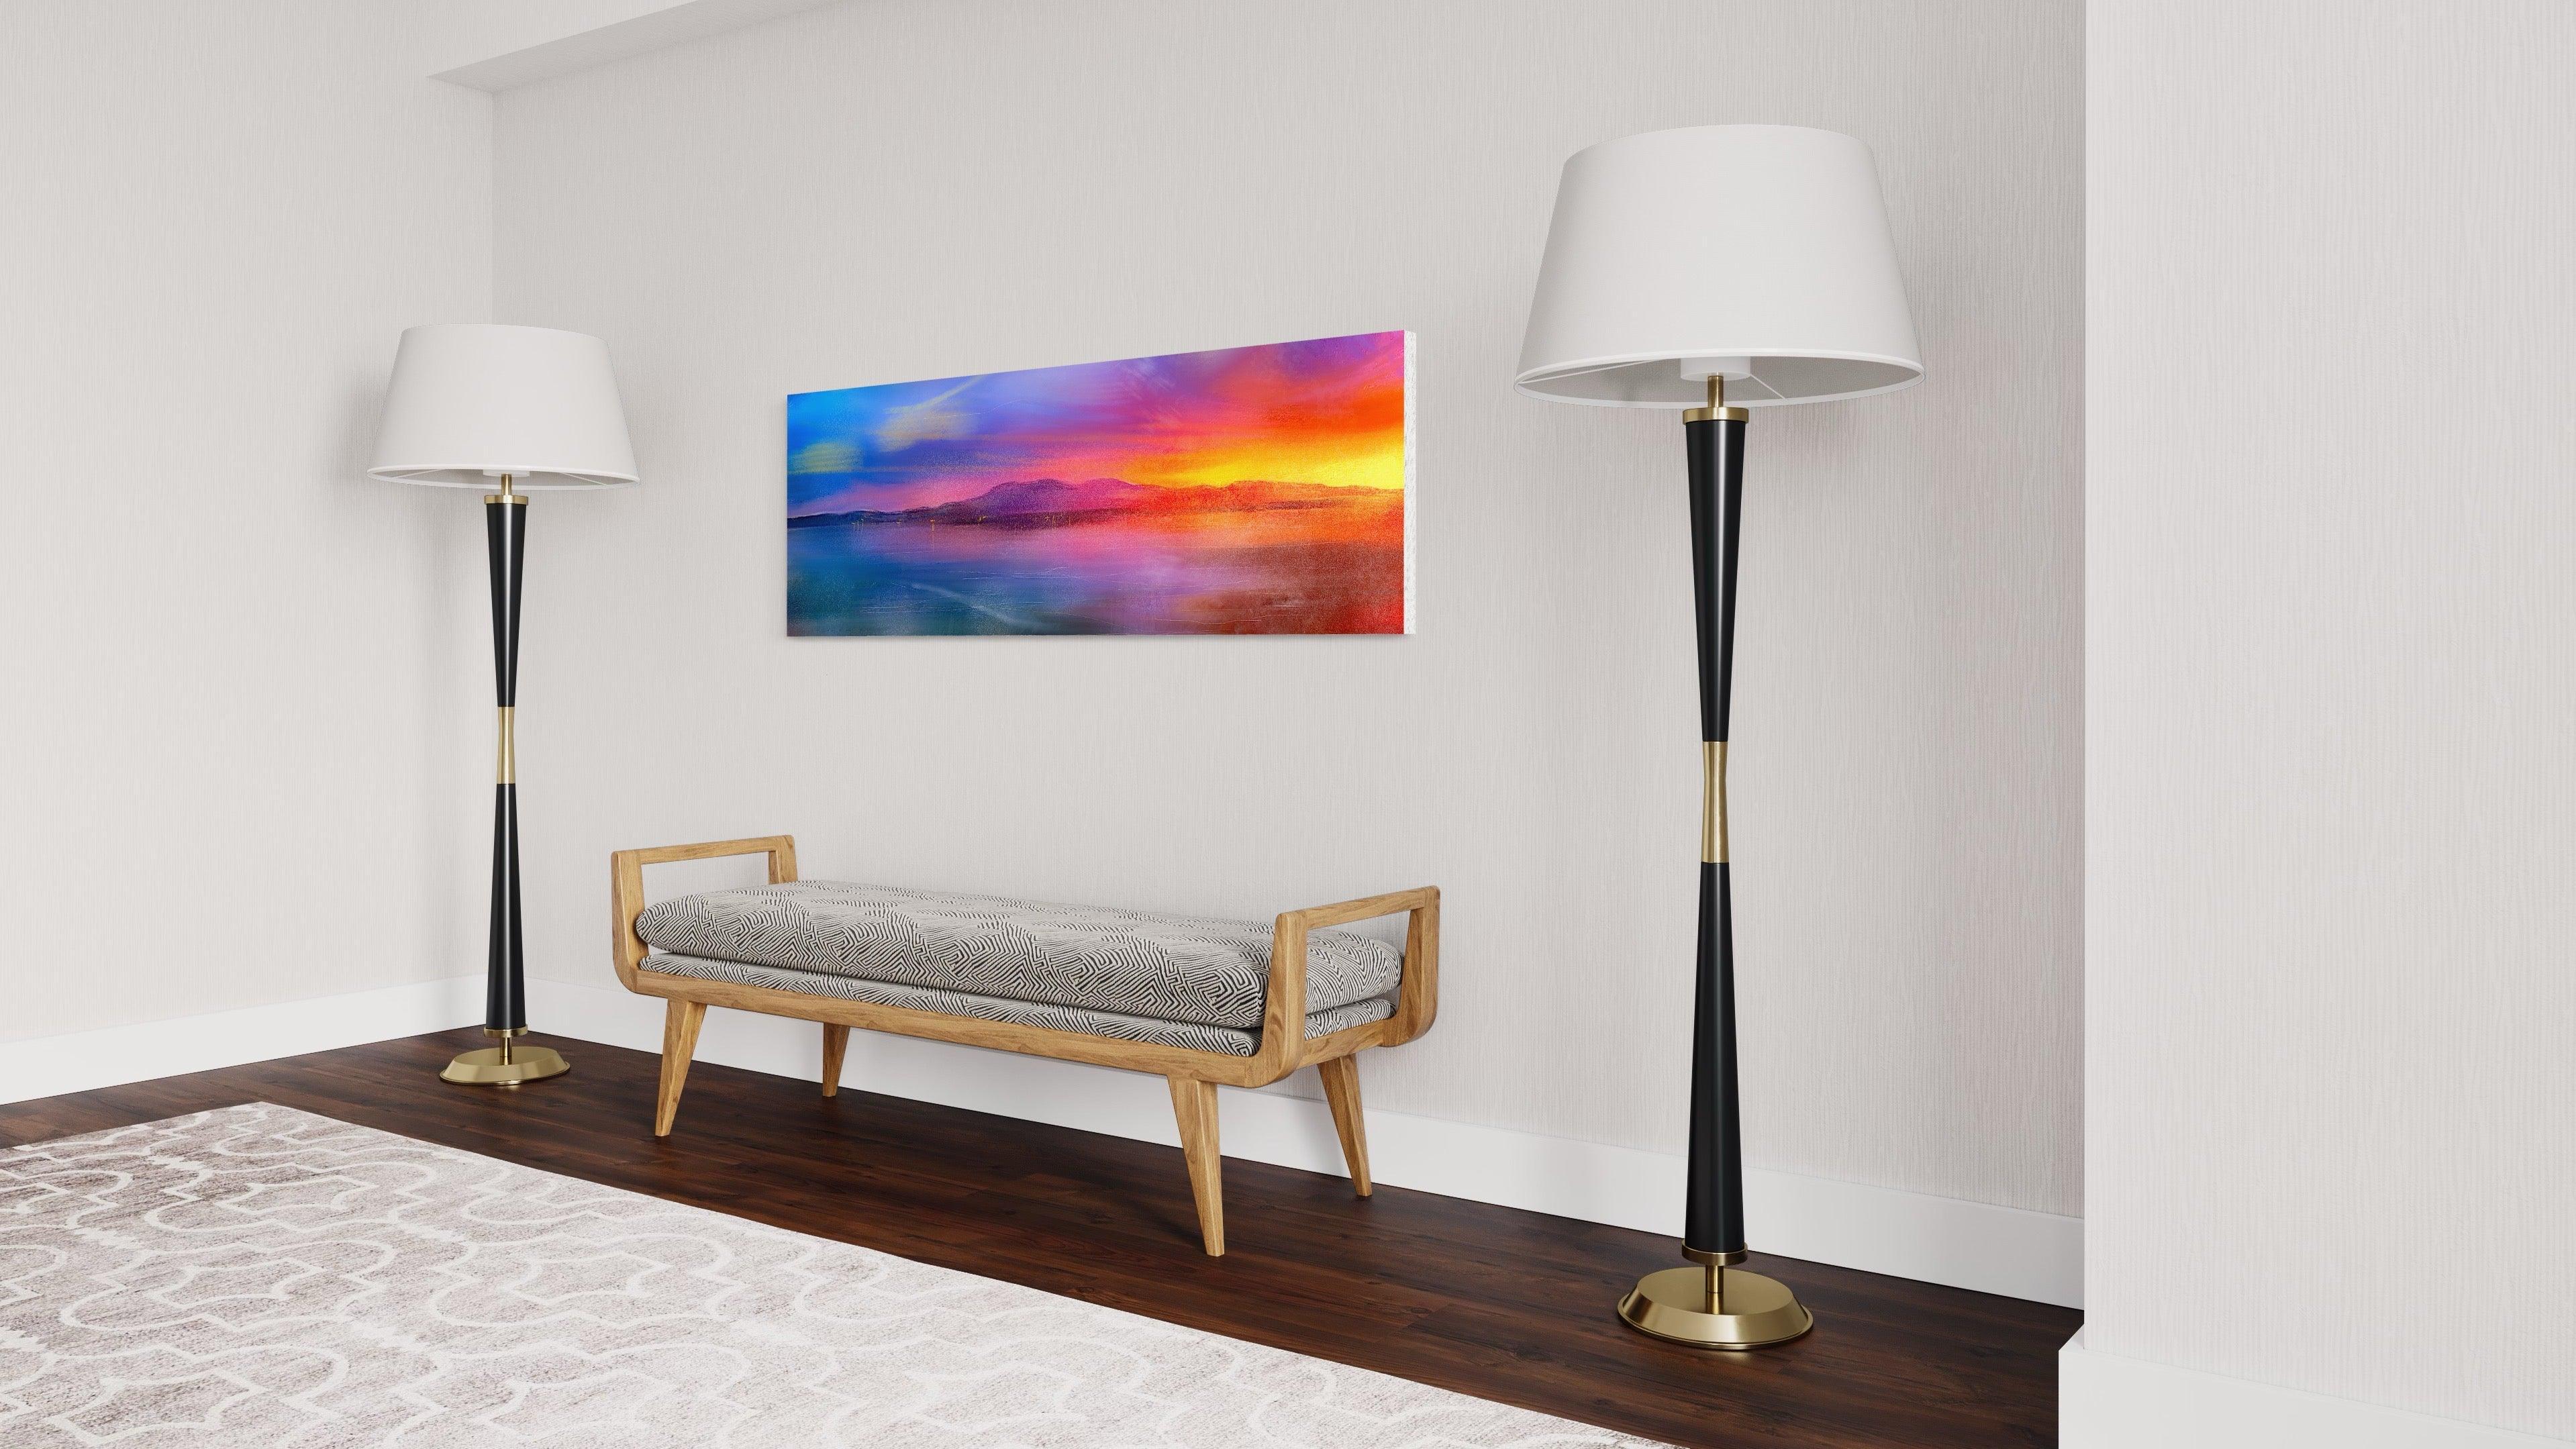 Arran Sunset Panoramic 60x20 inch Stretched Canvas Statement Wall Art